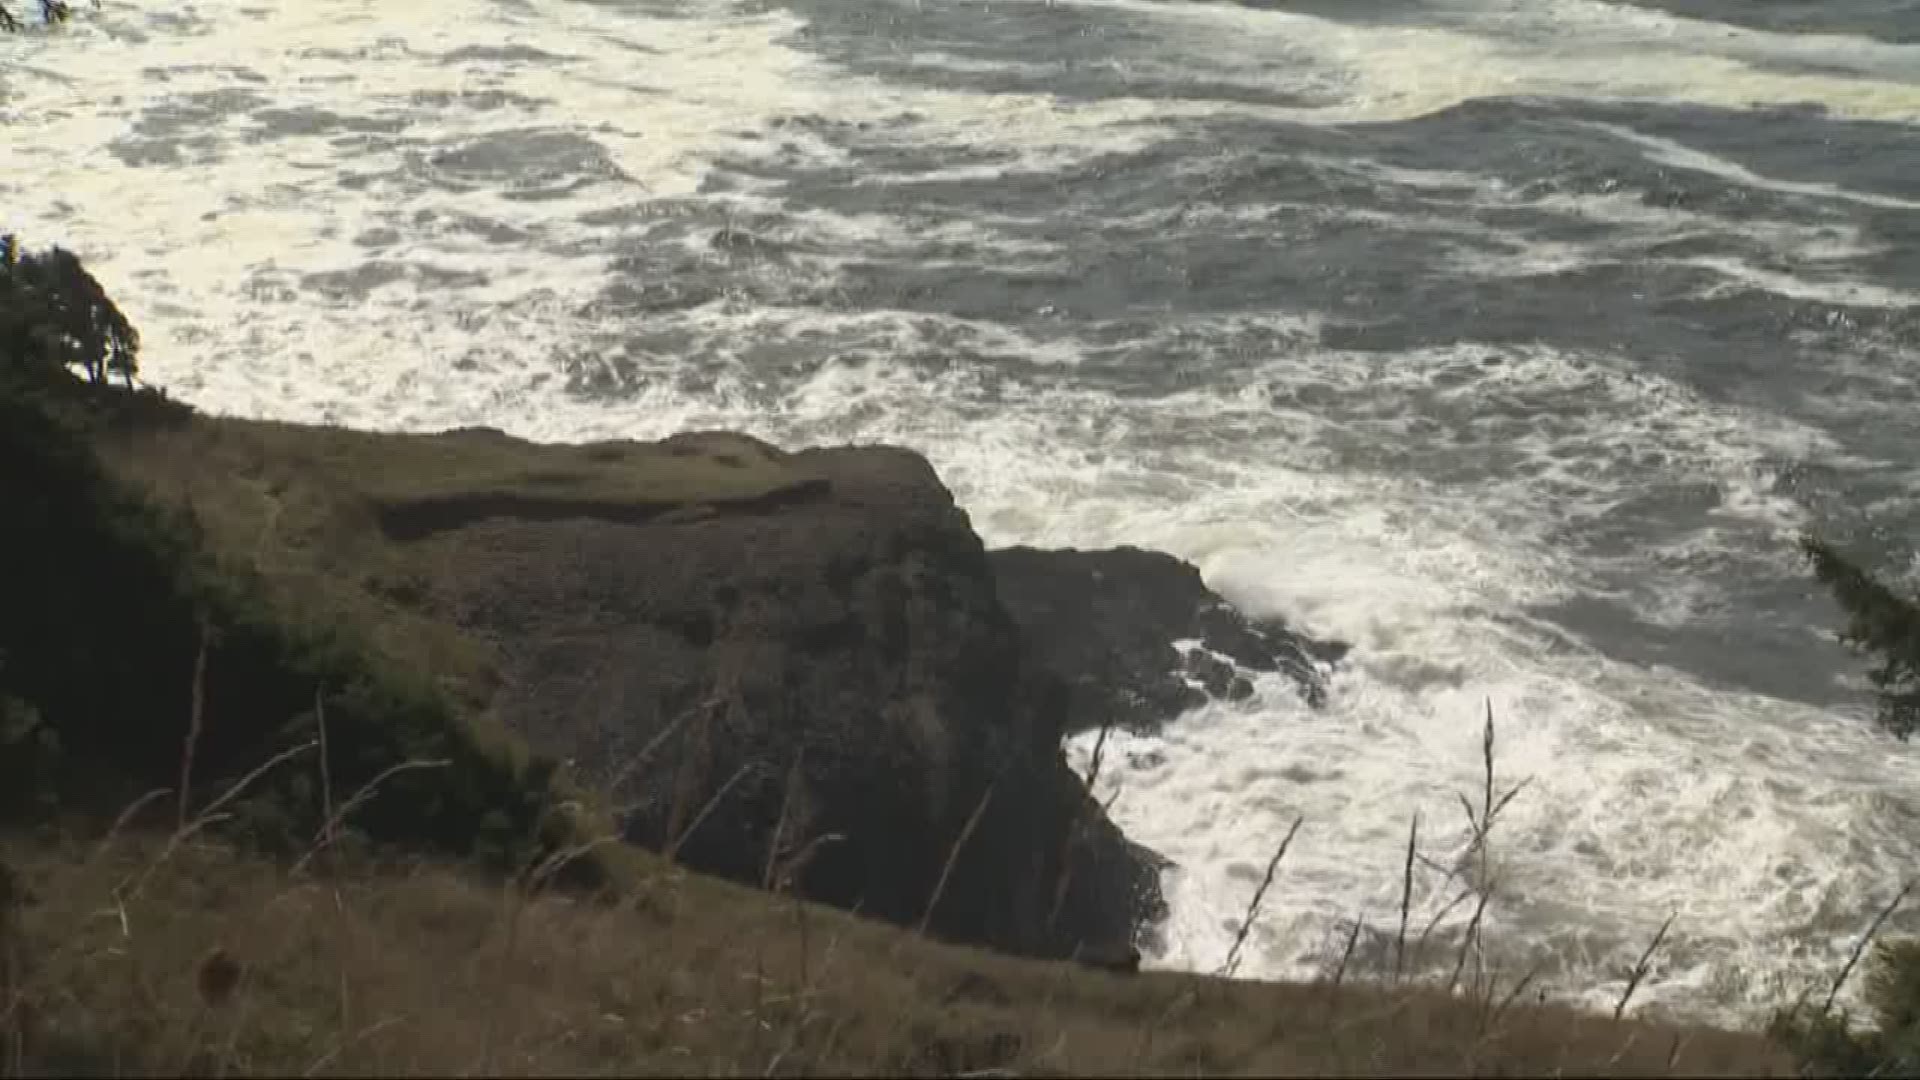 A husband and wife who were swept out to sea by a wave Sunday afternoon along the Oregon Coast did not survive, Oregon State Police said.